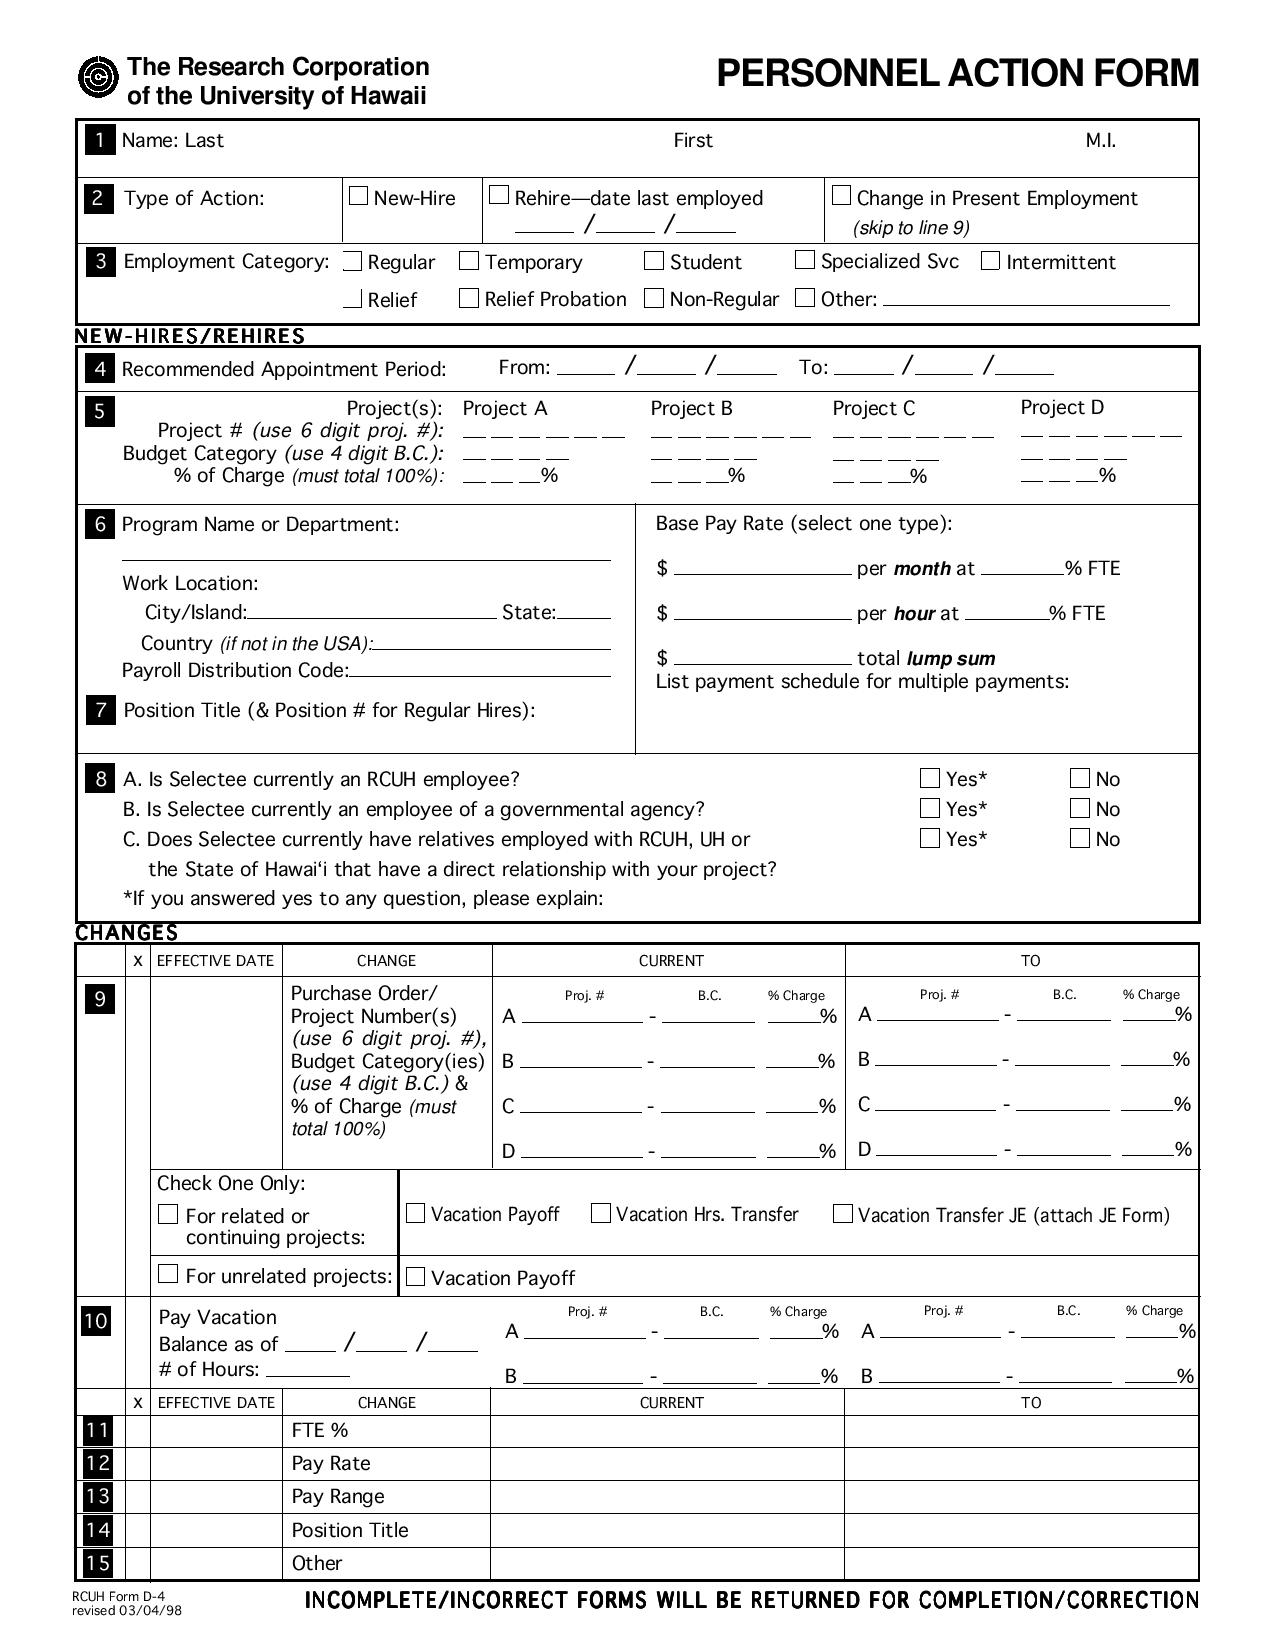 personnel action form for changes page 001